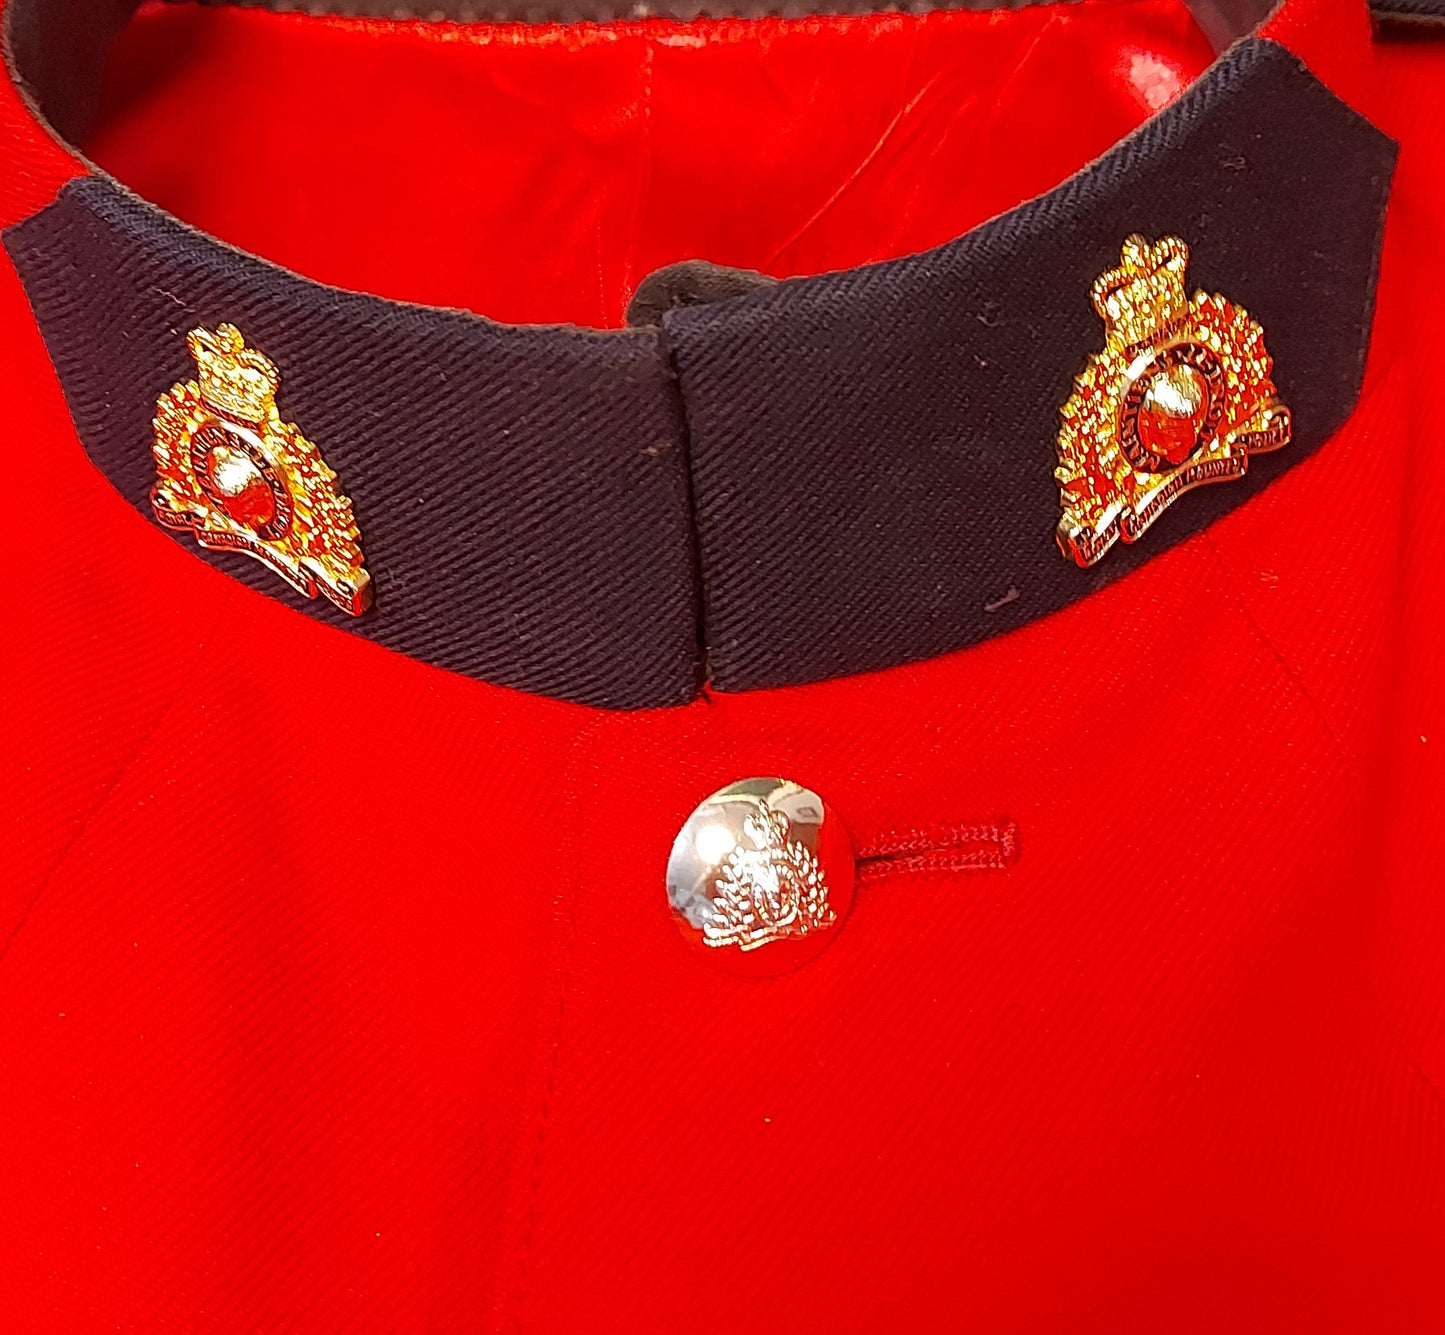 RCMP Royal Canadian Mounted Police Red Serge Tunic